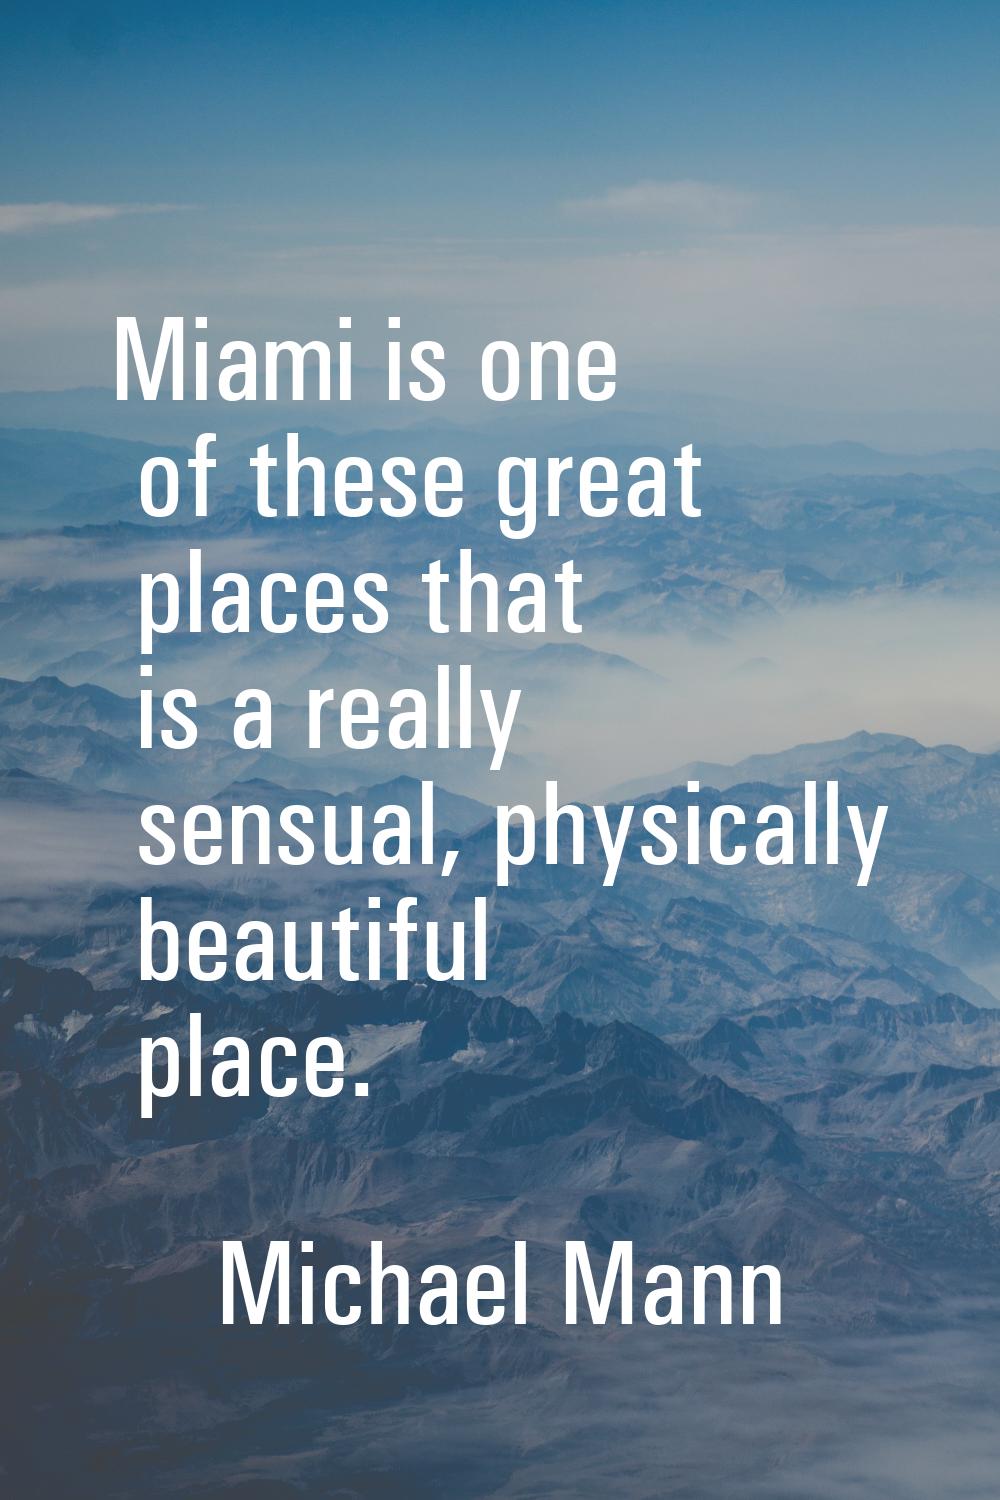 Miami is one of these great places that is a really sensual, physically beautiful place.